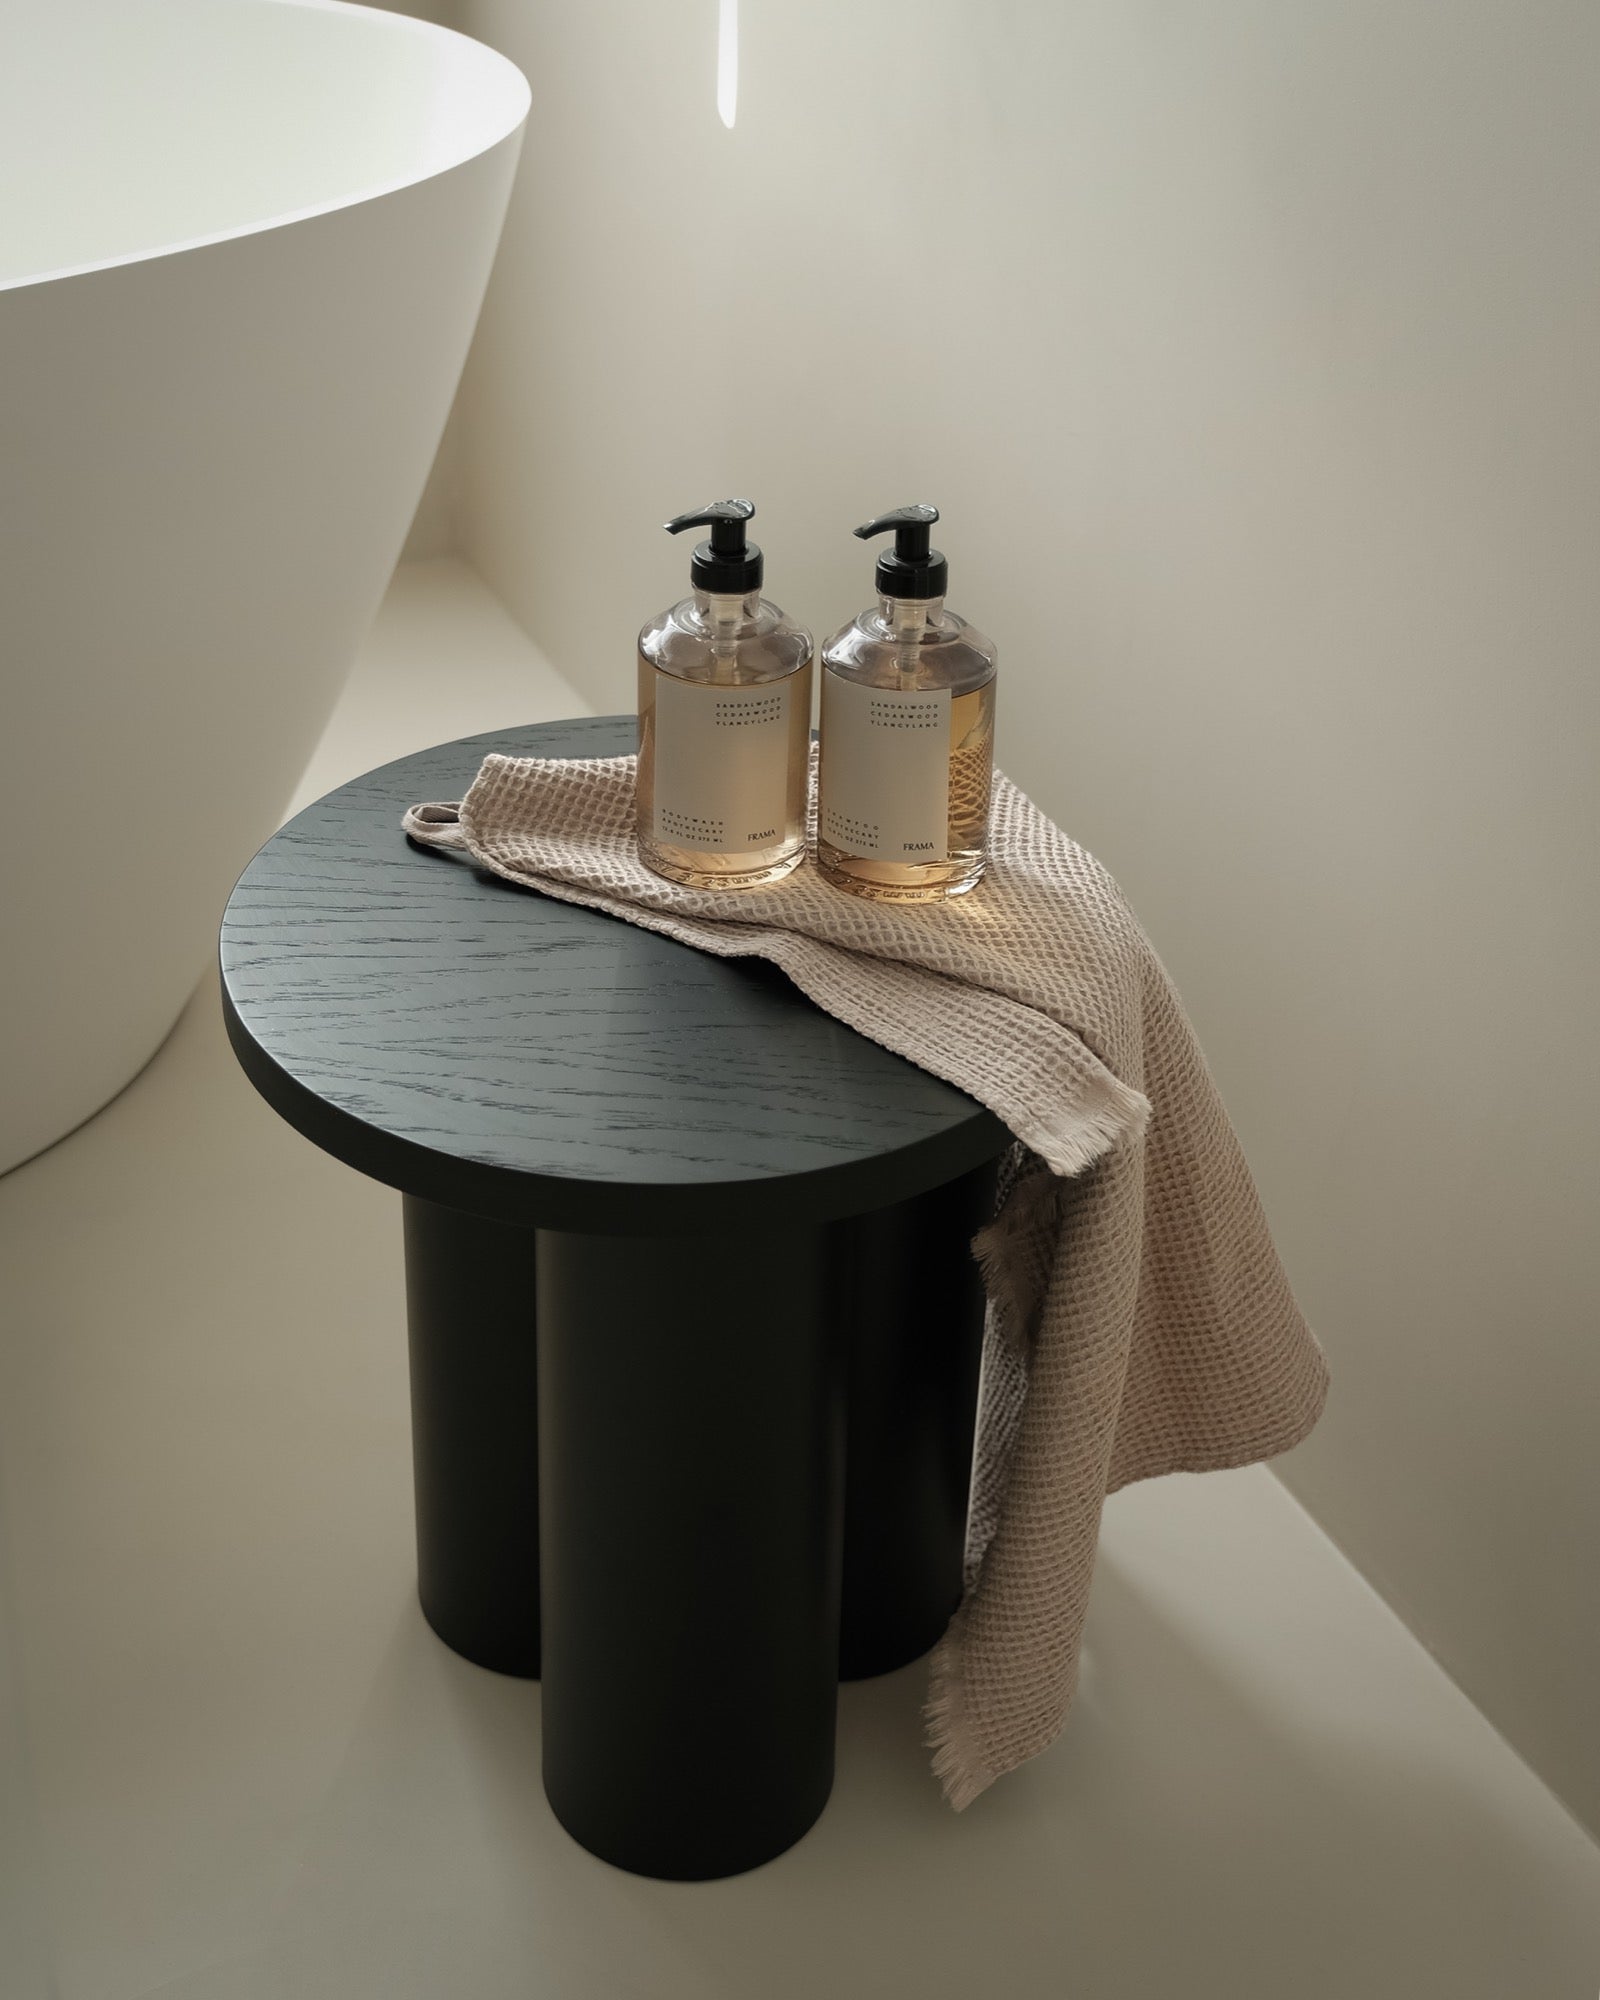 Elevate your bathroom and make your everyday routine even more enjoyable. Discover furniture and decor for small, aesthetic bathrooms, such as shelving units, side tables, mirrors, shelves, towel racks, and more. Get inspired with small bathroom ideas.